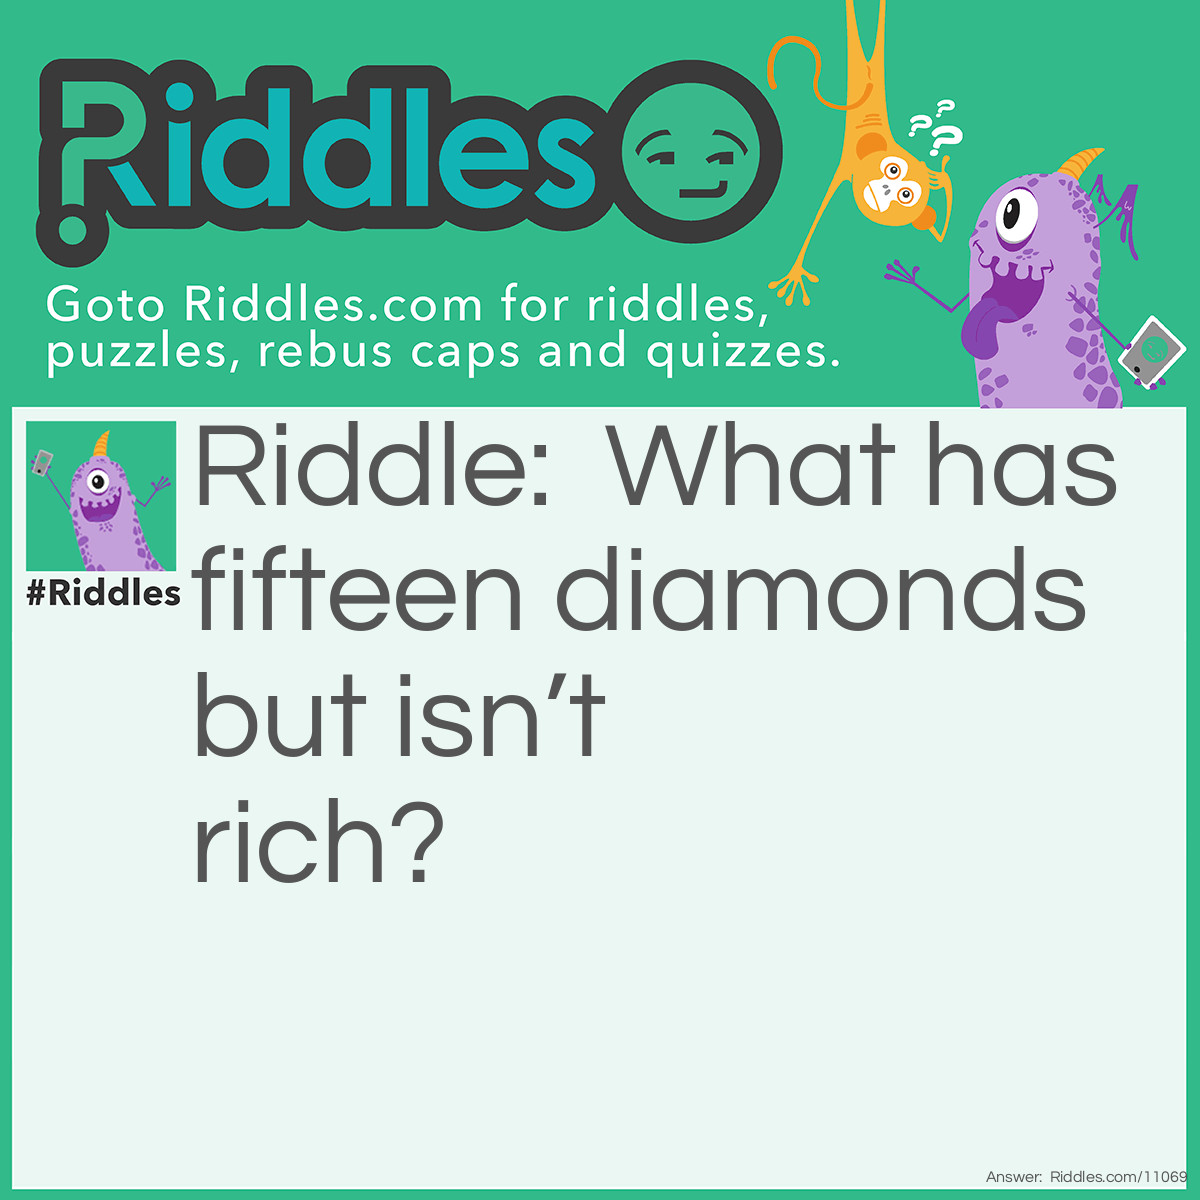 Riddle: What has fifteen diamonds but isn’t rich? Answer: A deck of cards.